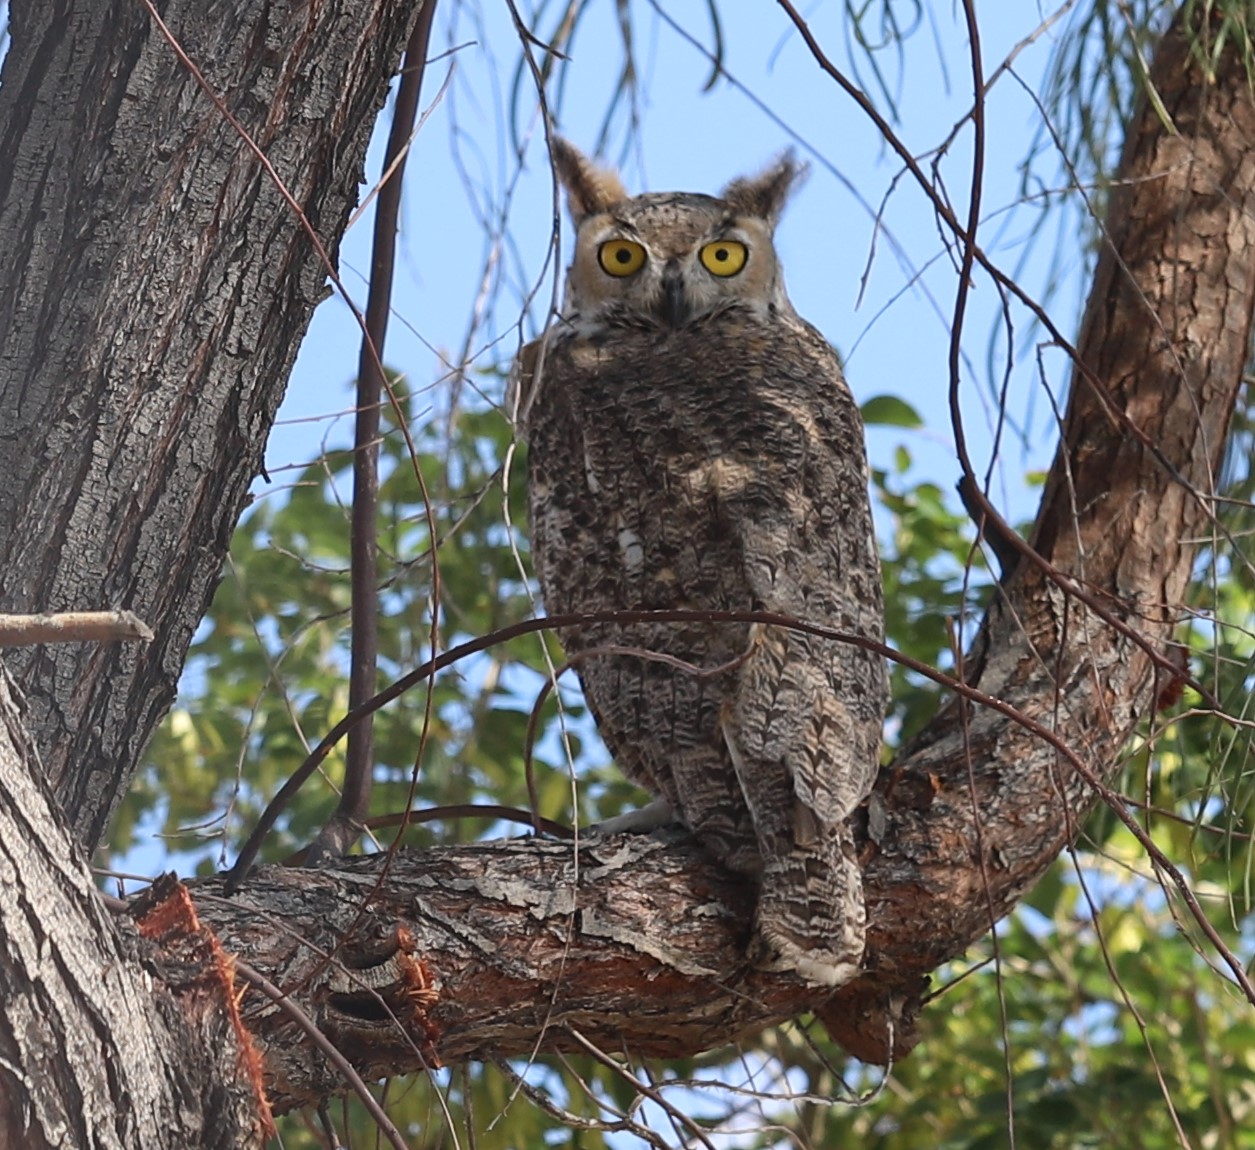 A large owl with yellow eyes perches on a tree branch, its feathers mottled brown and grey, blending seamlessly with the bark.